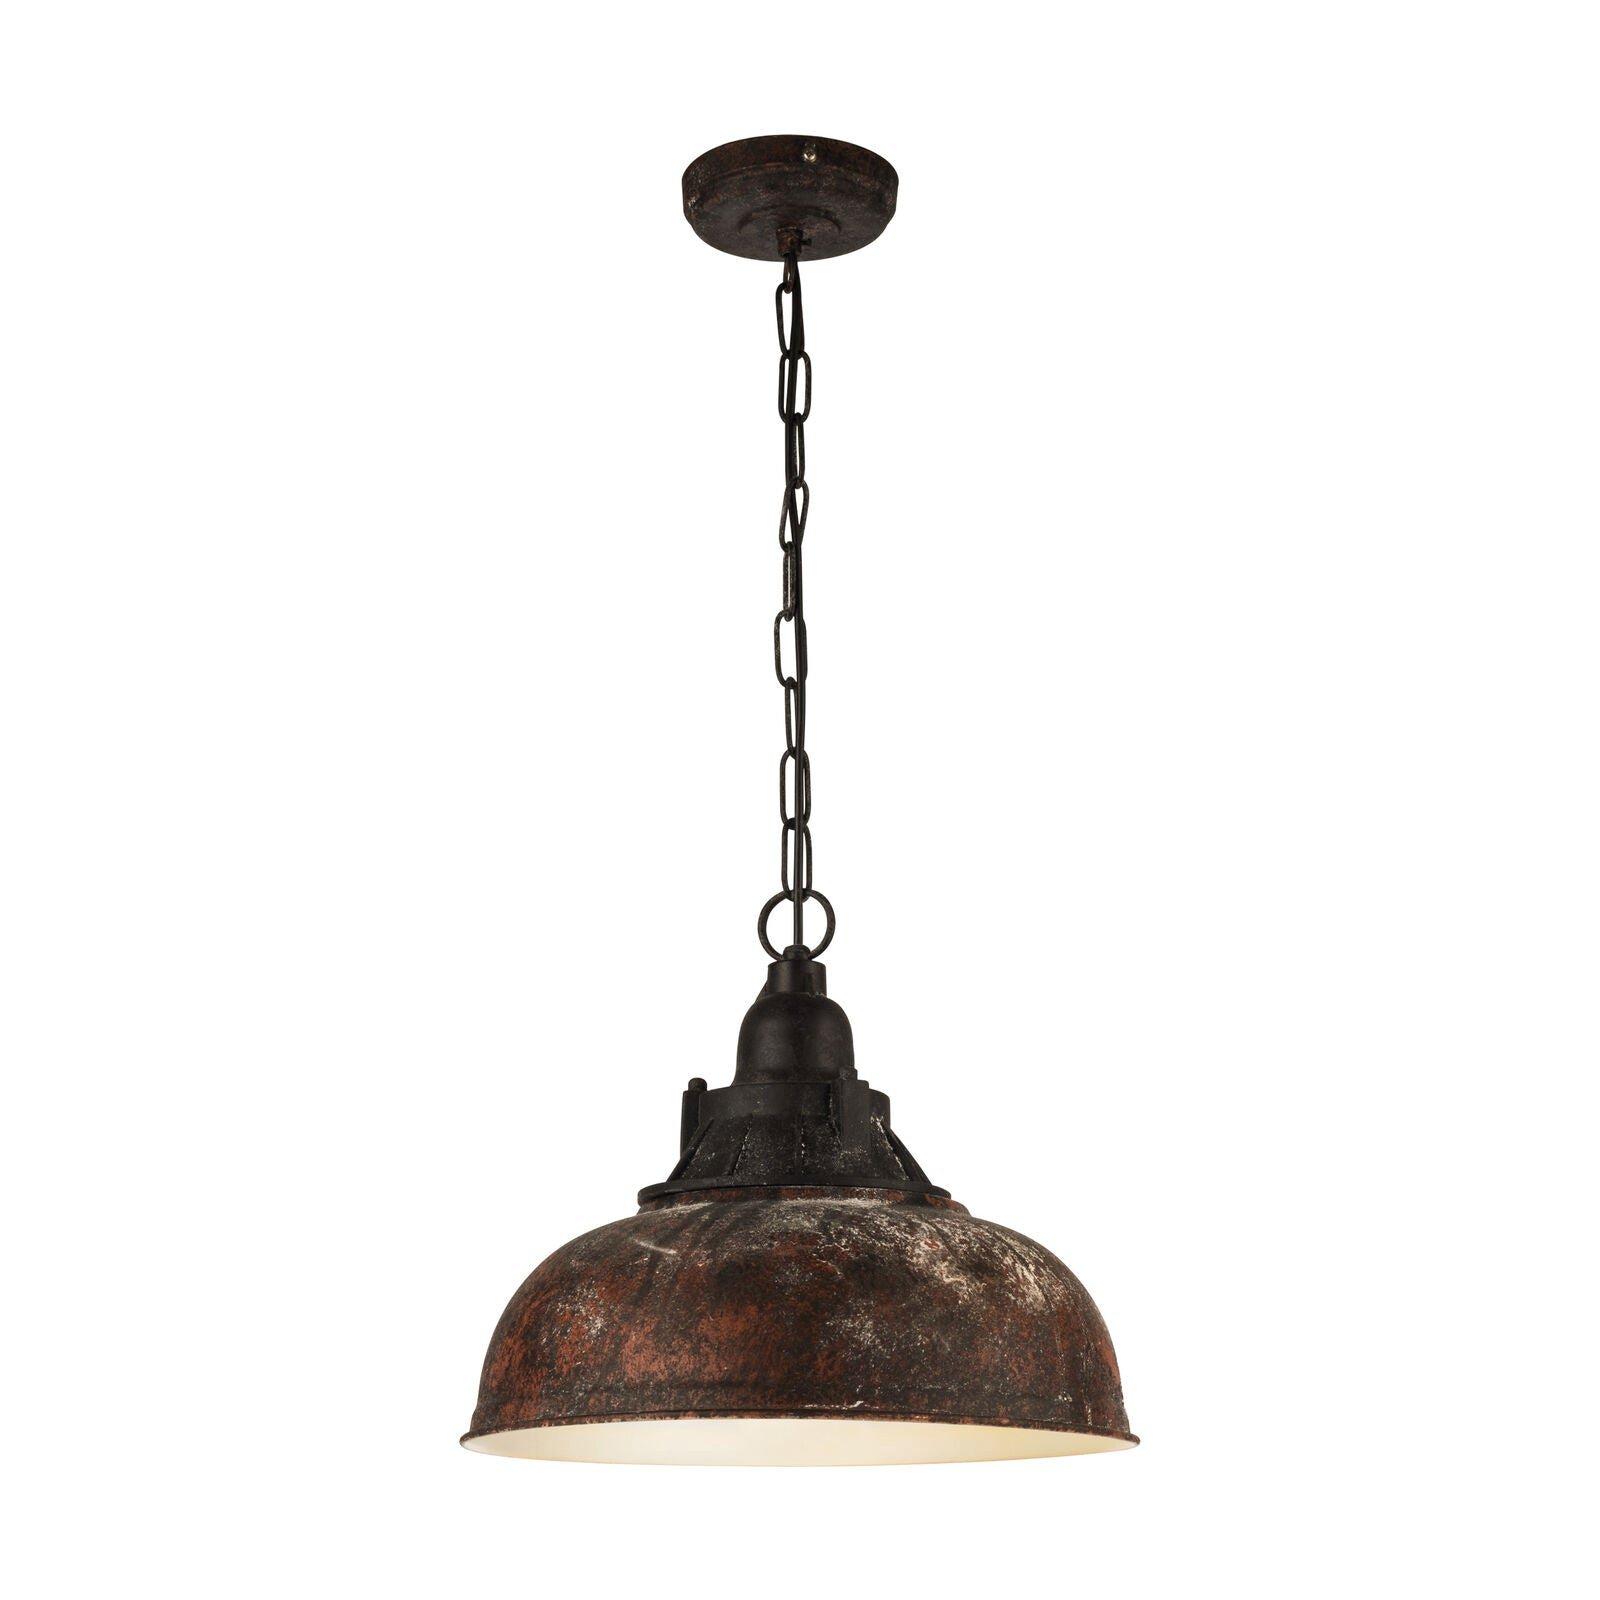 Hanging Ceiling Pendant Light Tarnished Copper Industrial Shade 1 x 60W E27